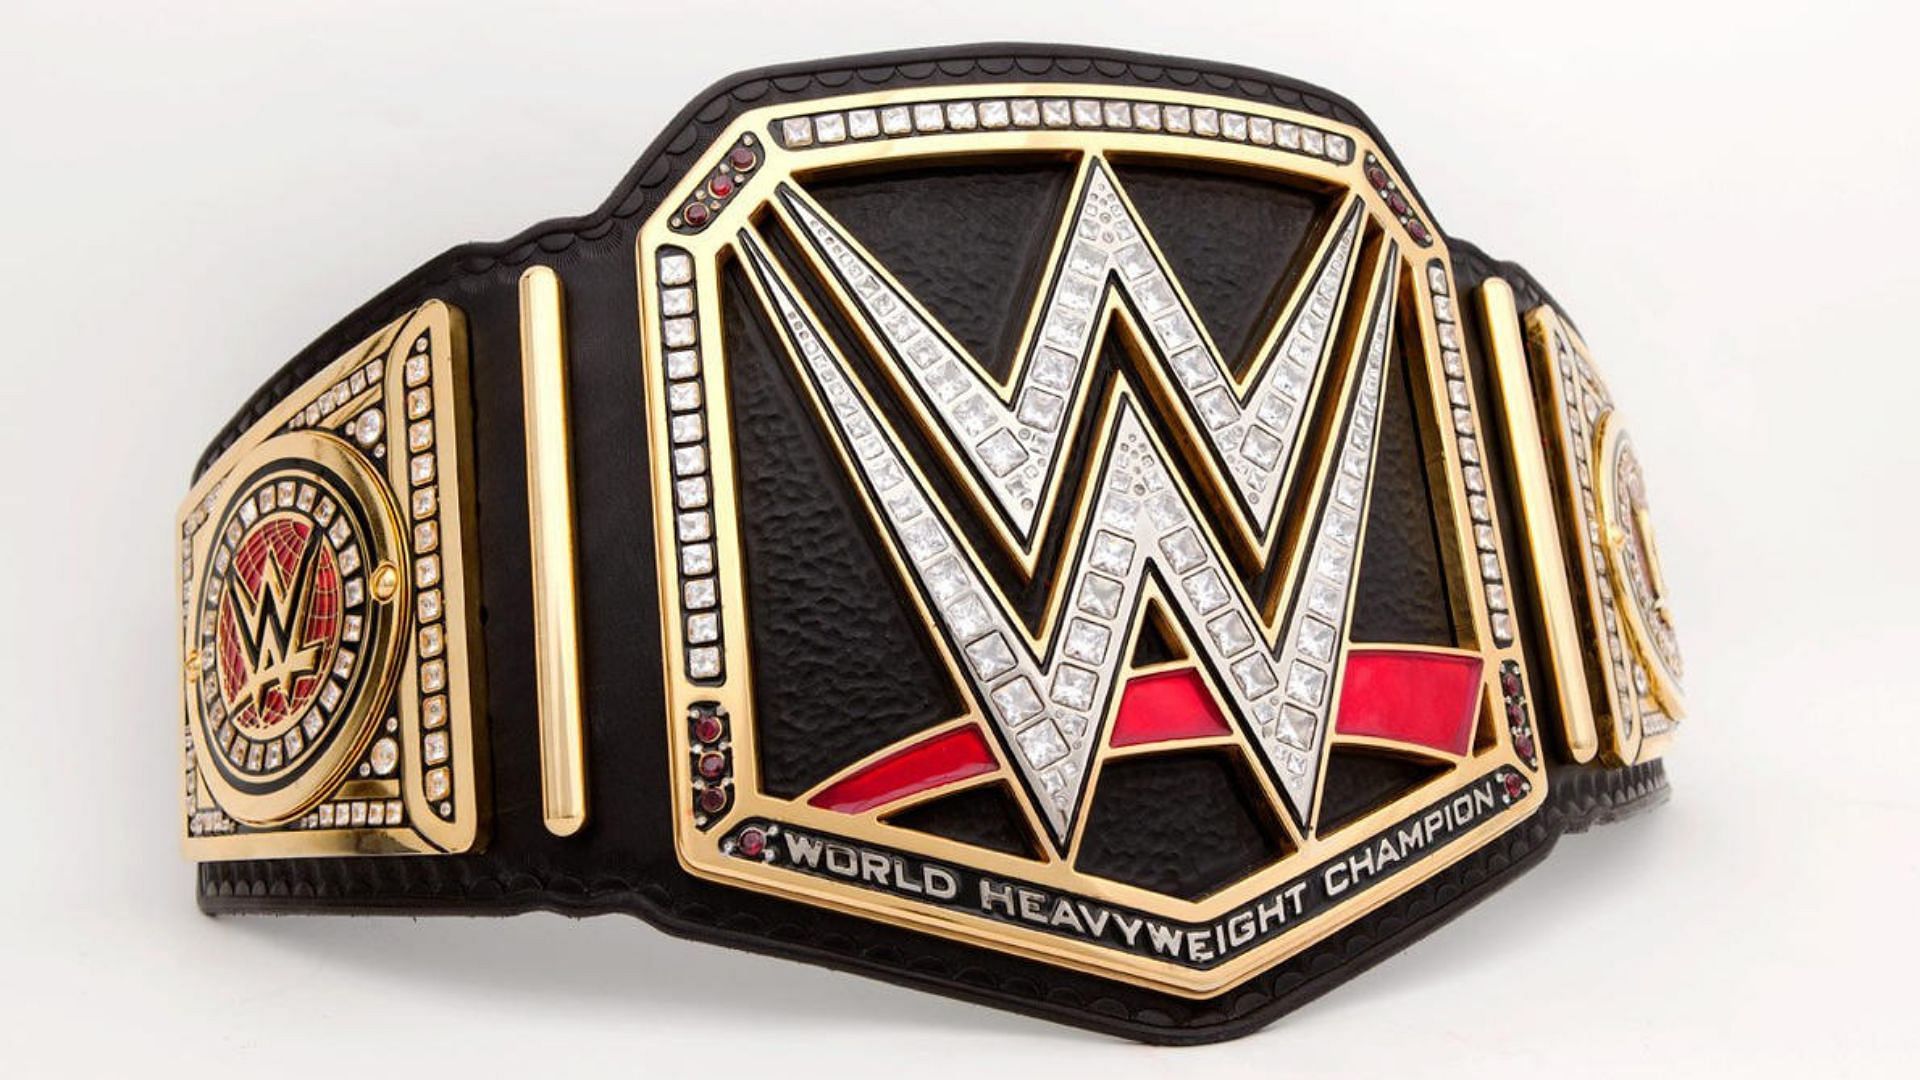 New WWE Championship was introduced in 2014 to Brock Lesnar!